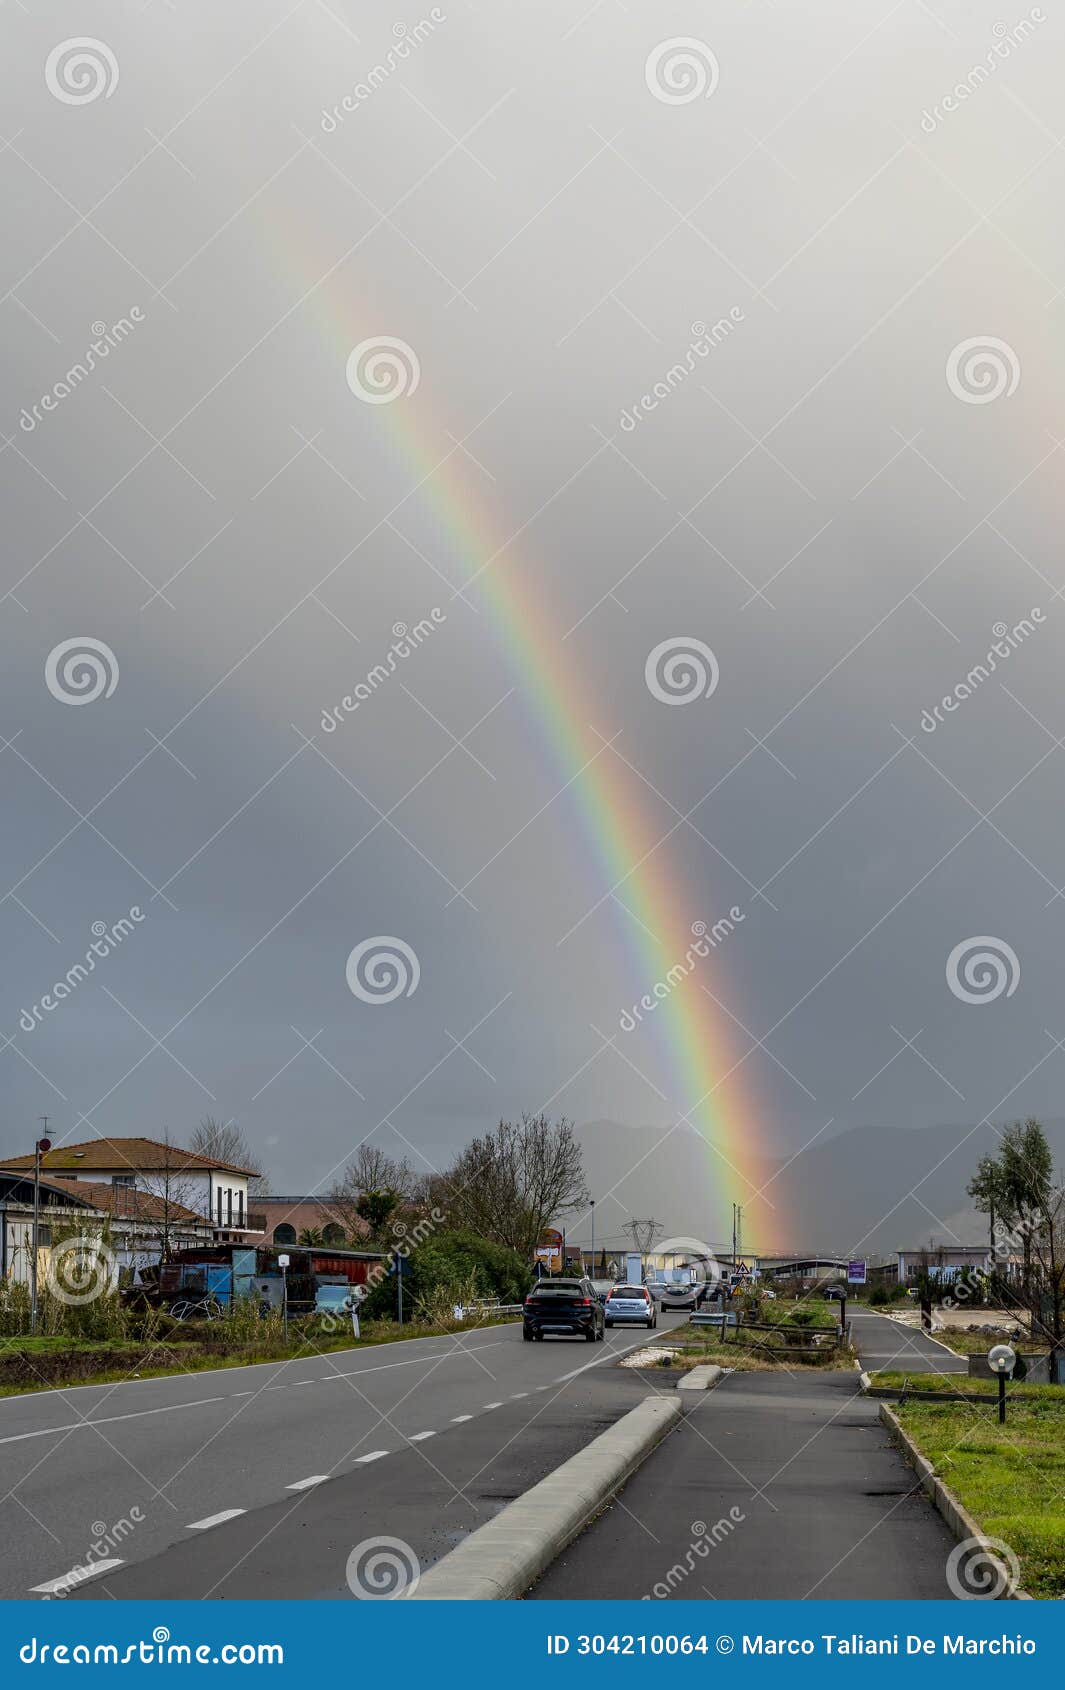 a large rainbow on the road that crosses the hamlet of lavoria, crespina lorenzana, pisa, italy